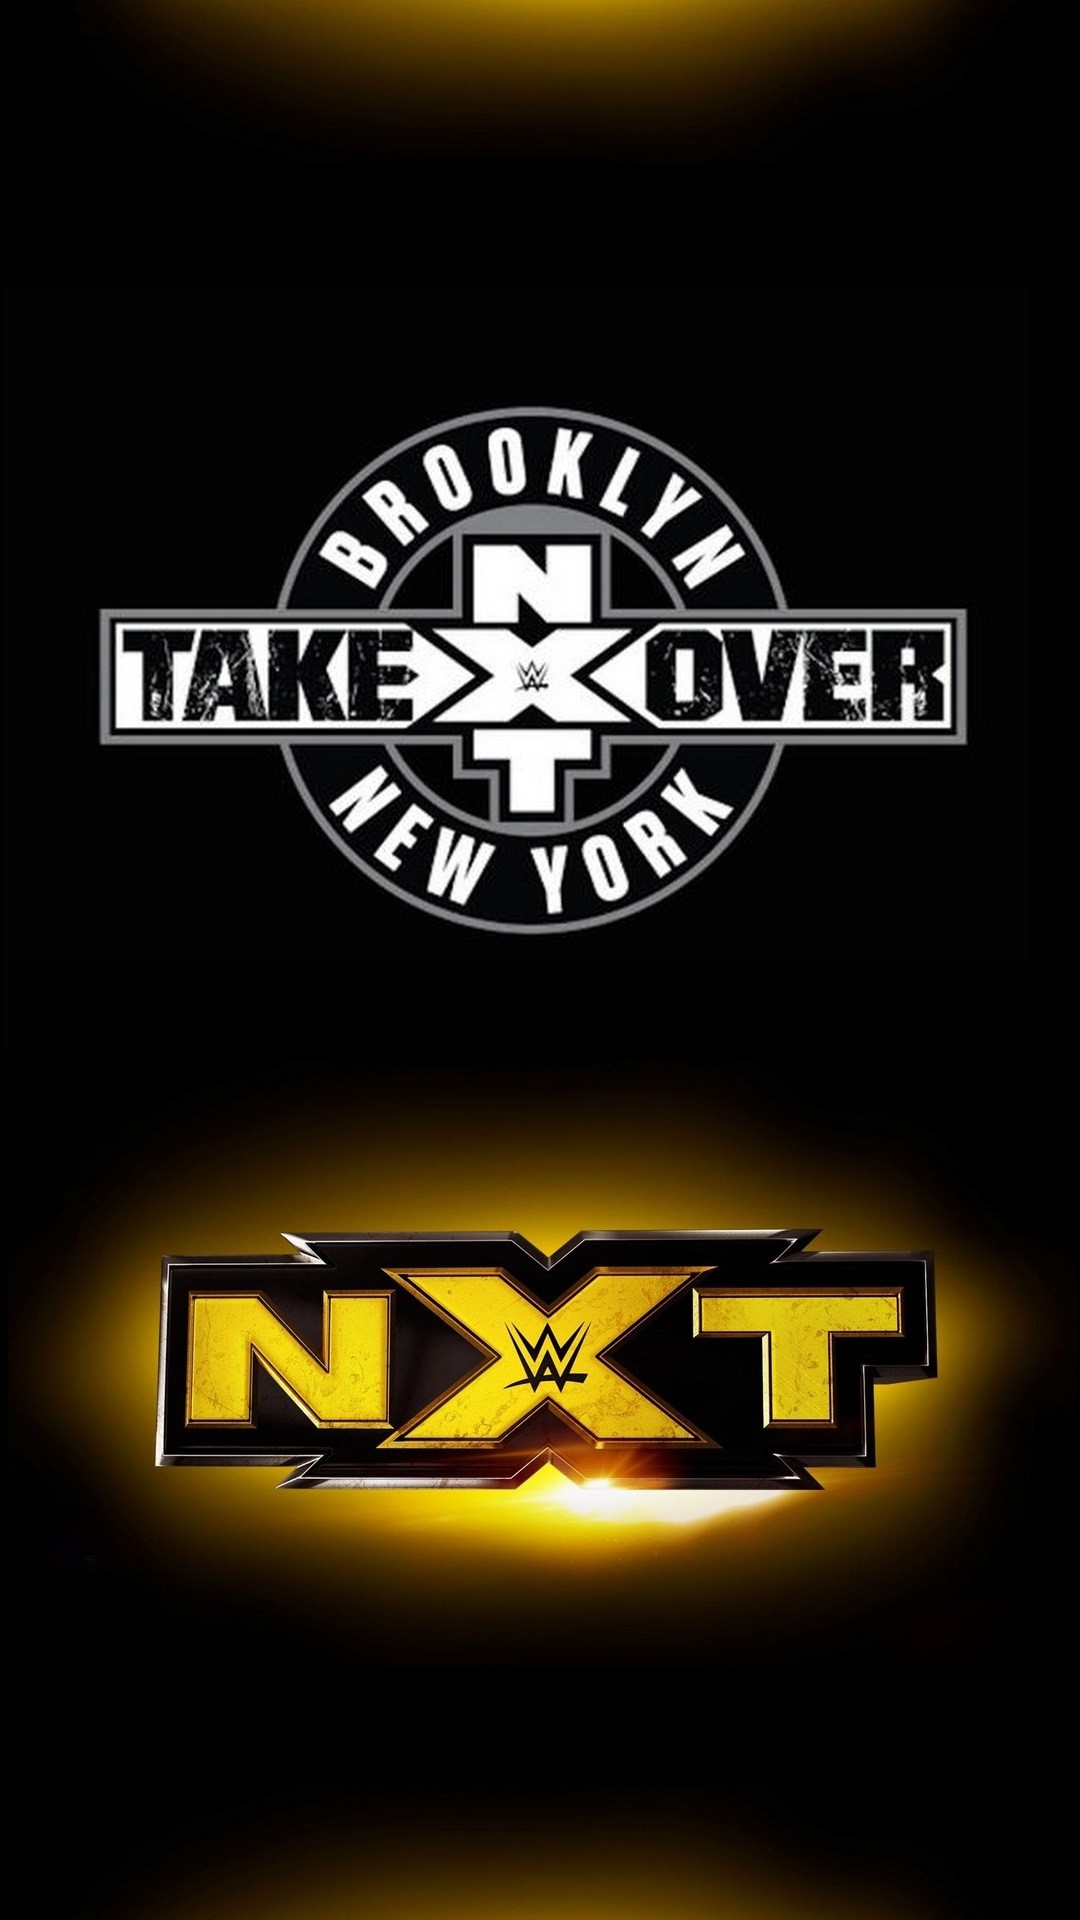 iPhone Wallpaper Nxt Wwe With High Resolution Pixel